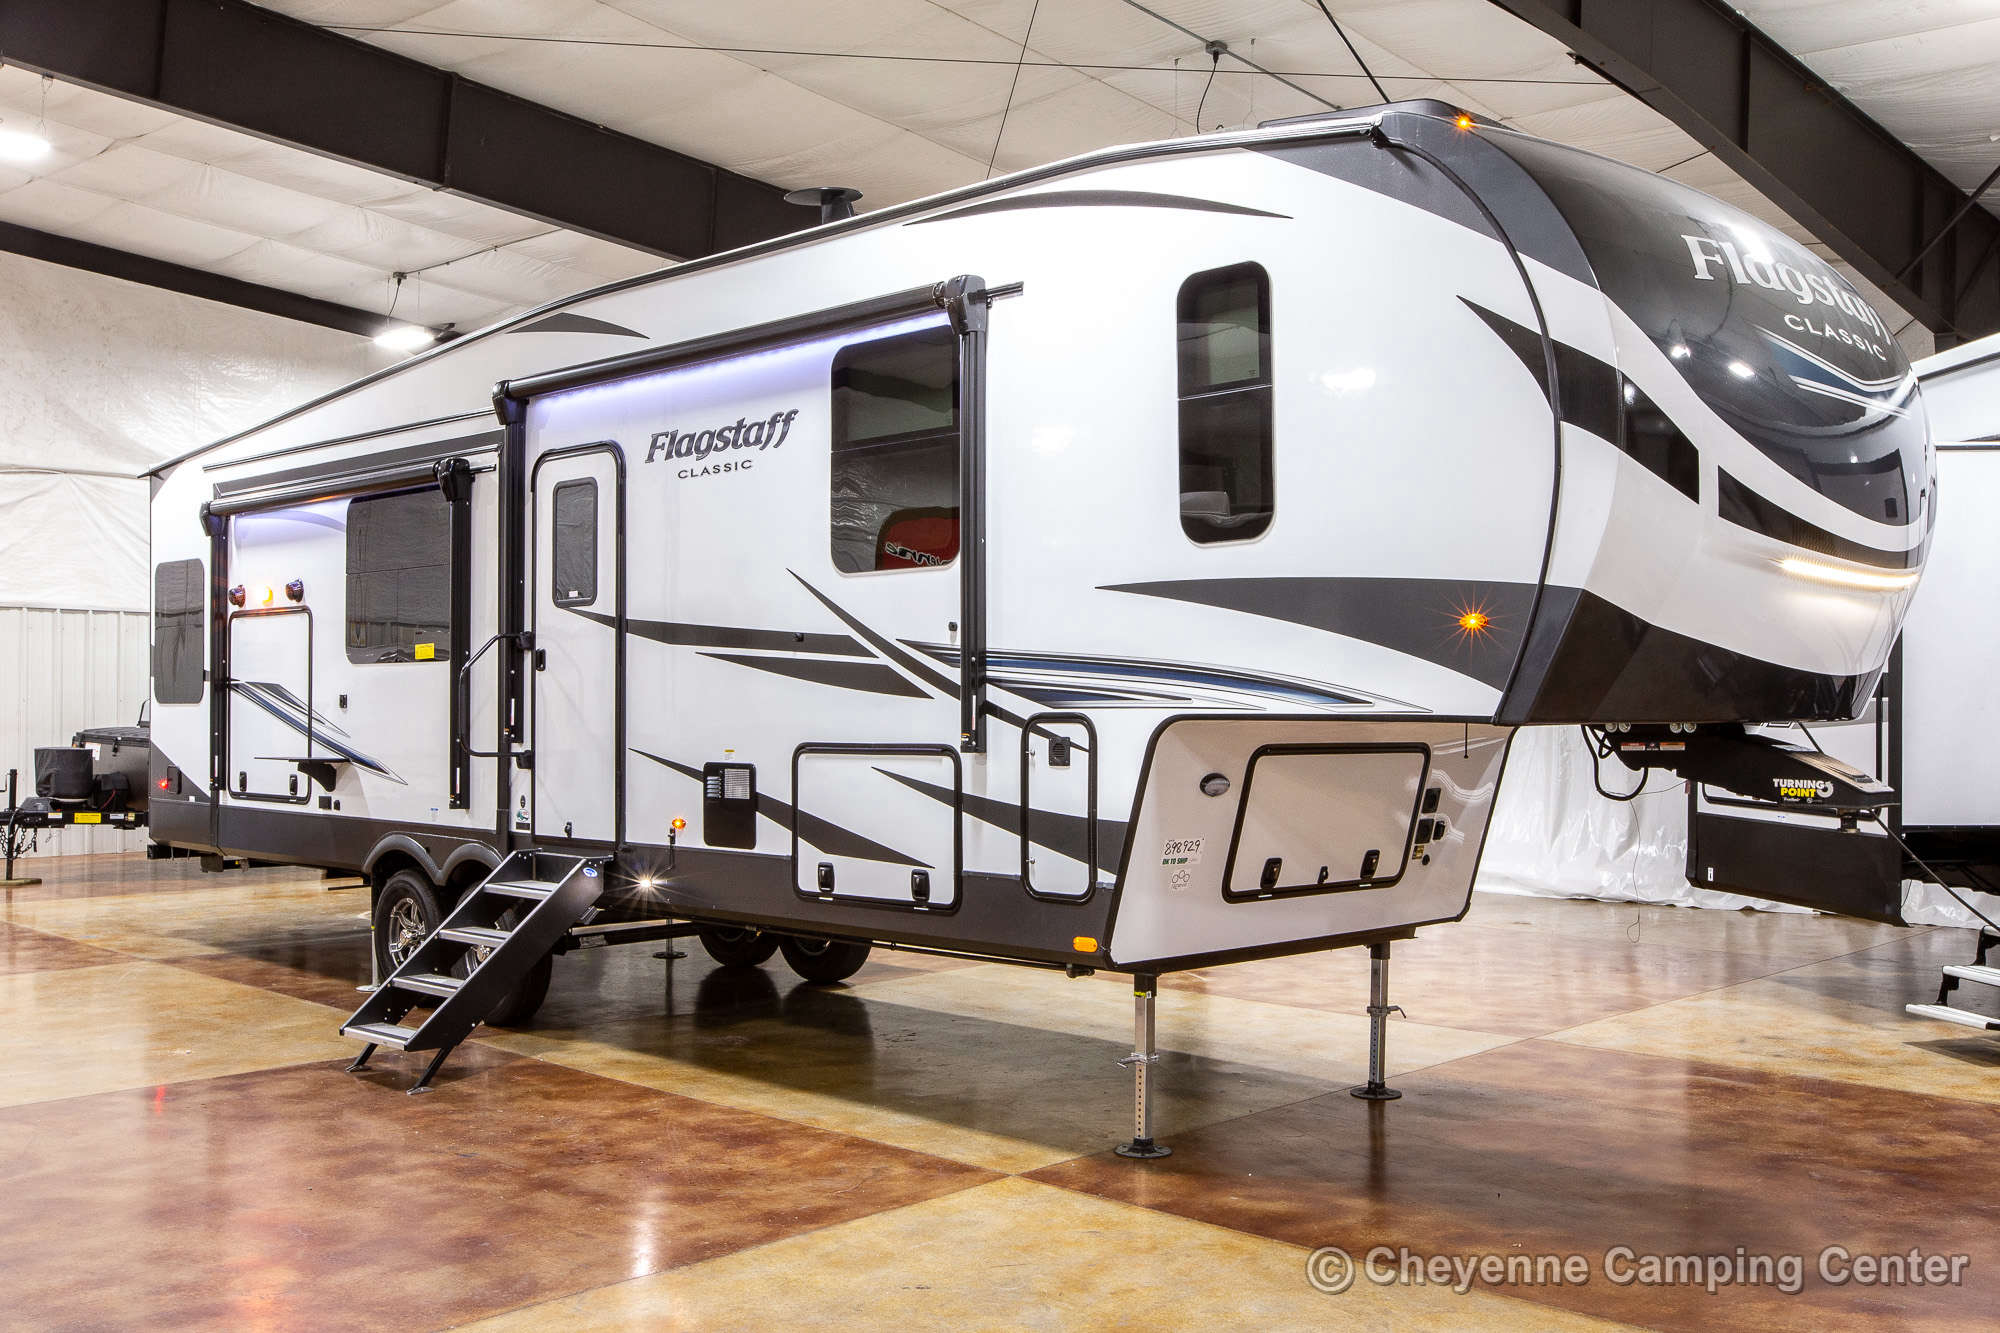 2022 Forest River Classic by Flagstaff 8529CSB Fifth Wheel Exterior Image